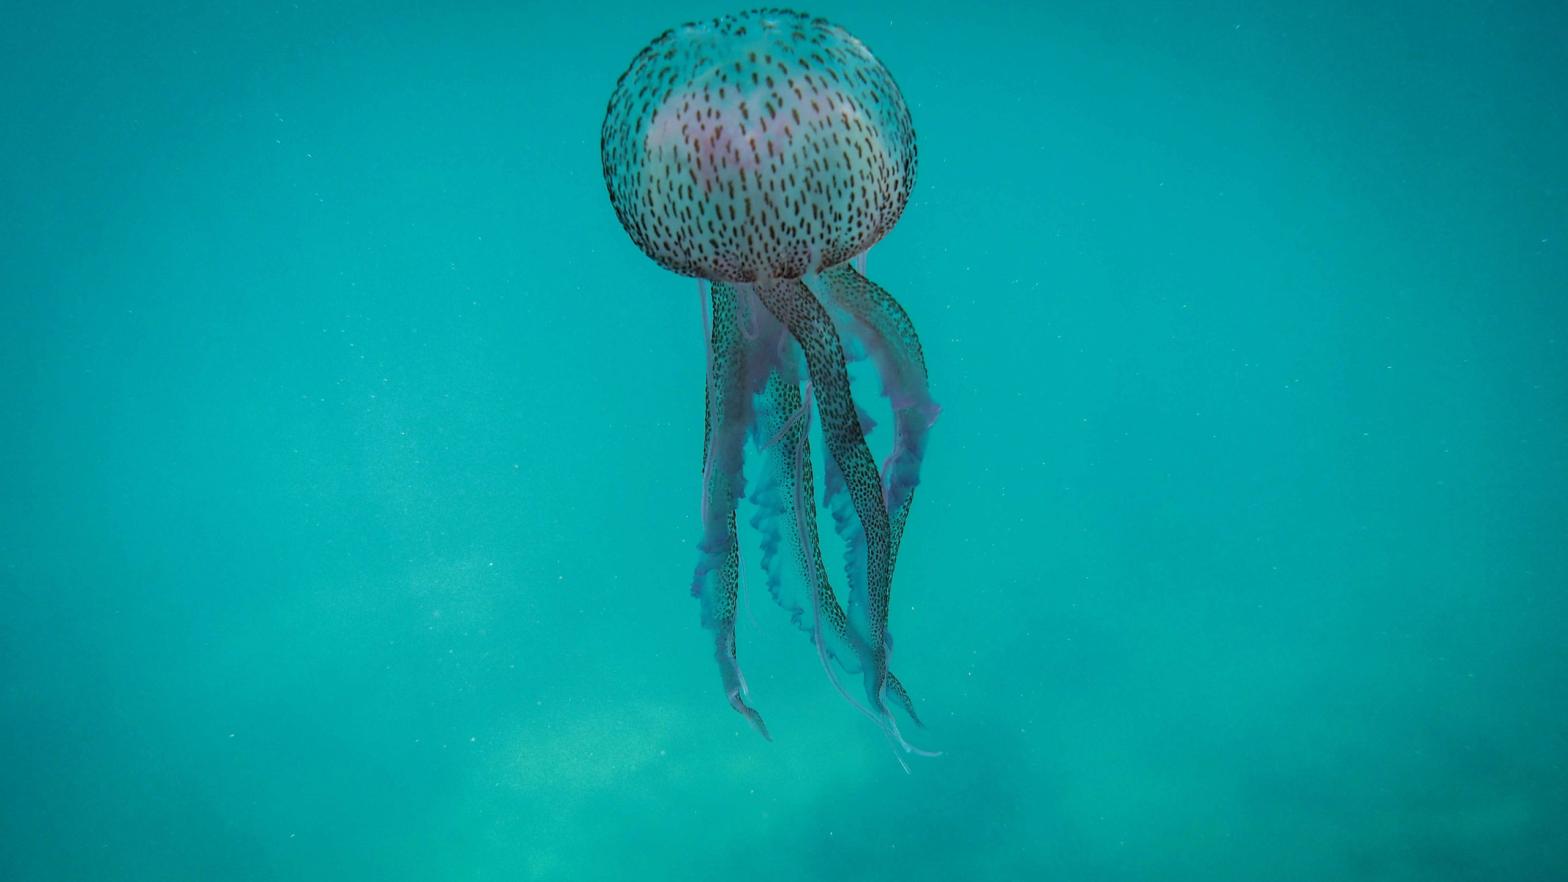 This underwater picture from off the coast Lebanon's northern town of Qalamun on May 27, 2020 shows a Medusa luminosa, a species of jellyfish commonly known as the mauve stinger.  (Photo: Ibrahim Chalhoub, Getty Images)